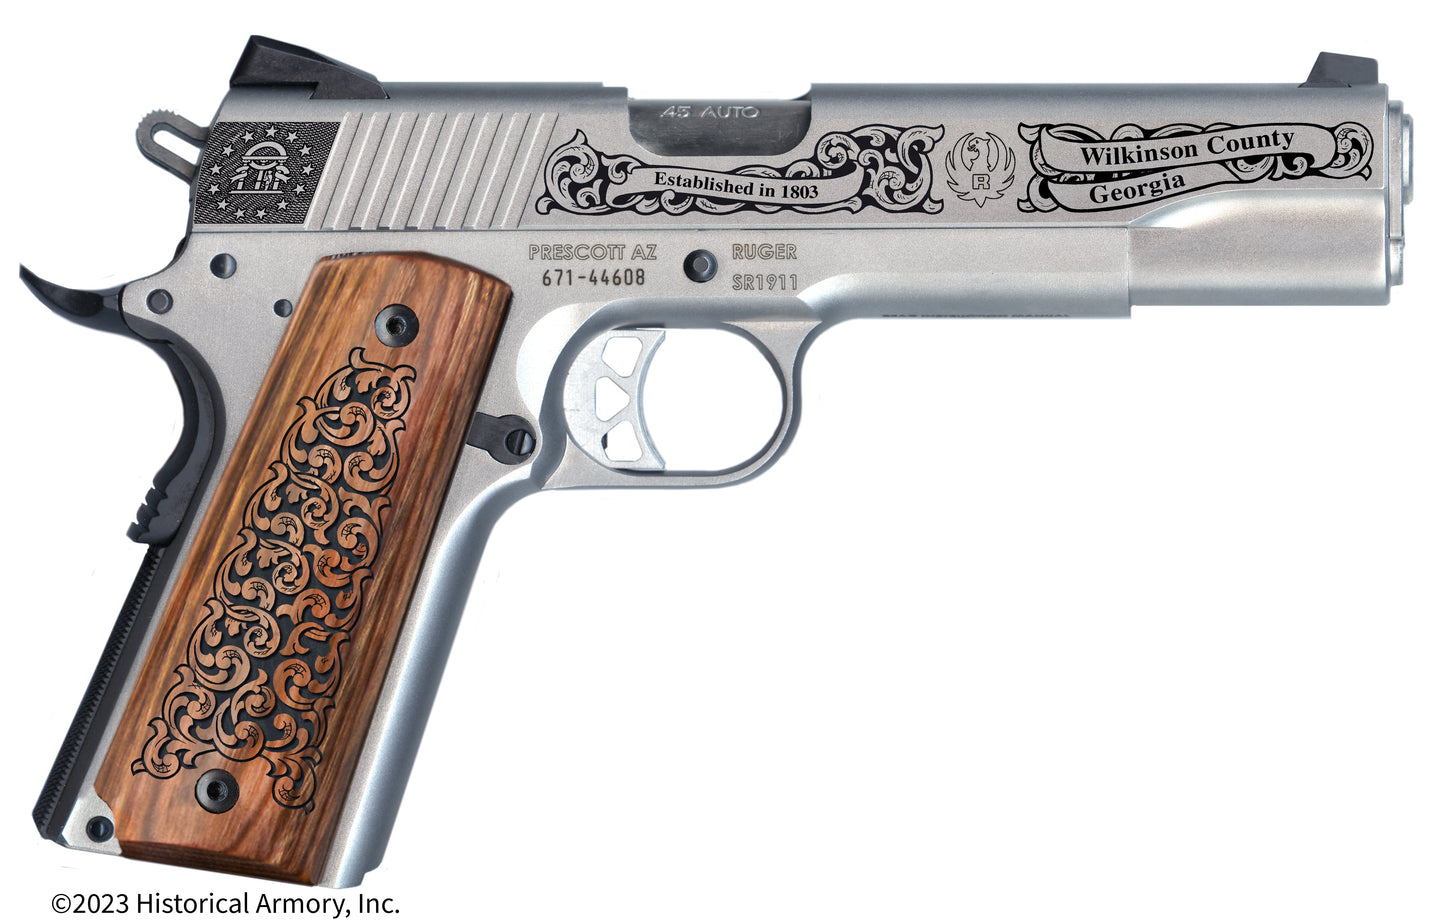 Wilkinson County Georgia Engraved .45 Auto Ruger 1911